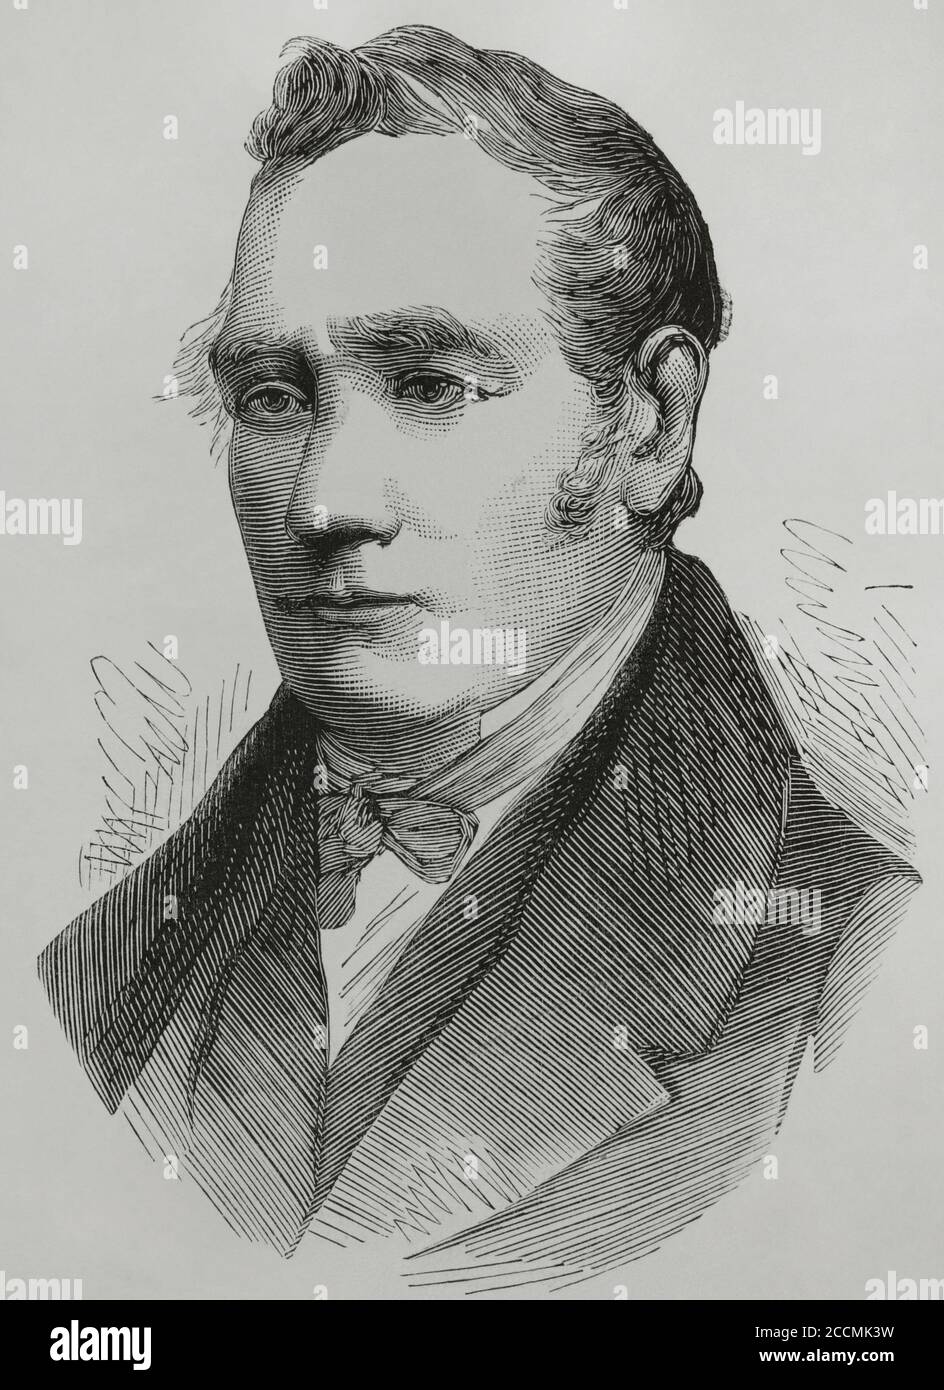 George Stephenson (1781-1848). British engineer and principal inventor of the railroad locomotive. Made by George Setphenson and his son Robert's company Robert Stephenson and Company, the Locomotion No. 1 was the first steam locomotive to carry passengers on a public rail line, the Stockton and Darlington Railway in 1825. Portrait. Engraving. La Ilustracion Española y Americana, 1881. Stock Photo